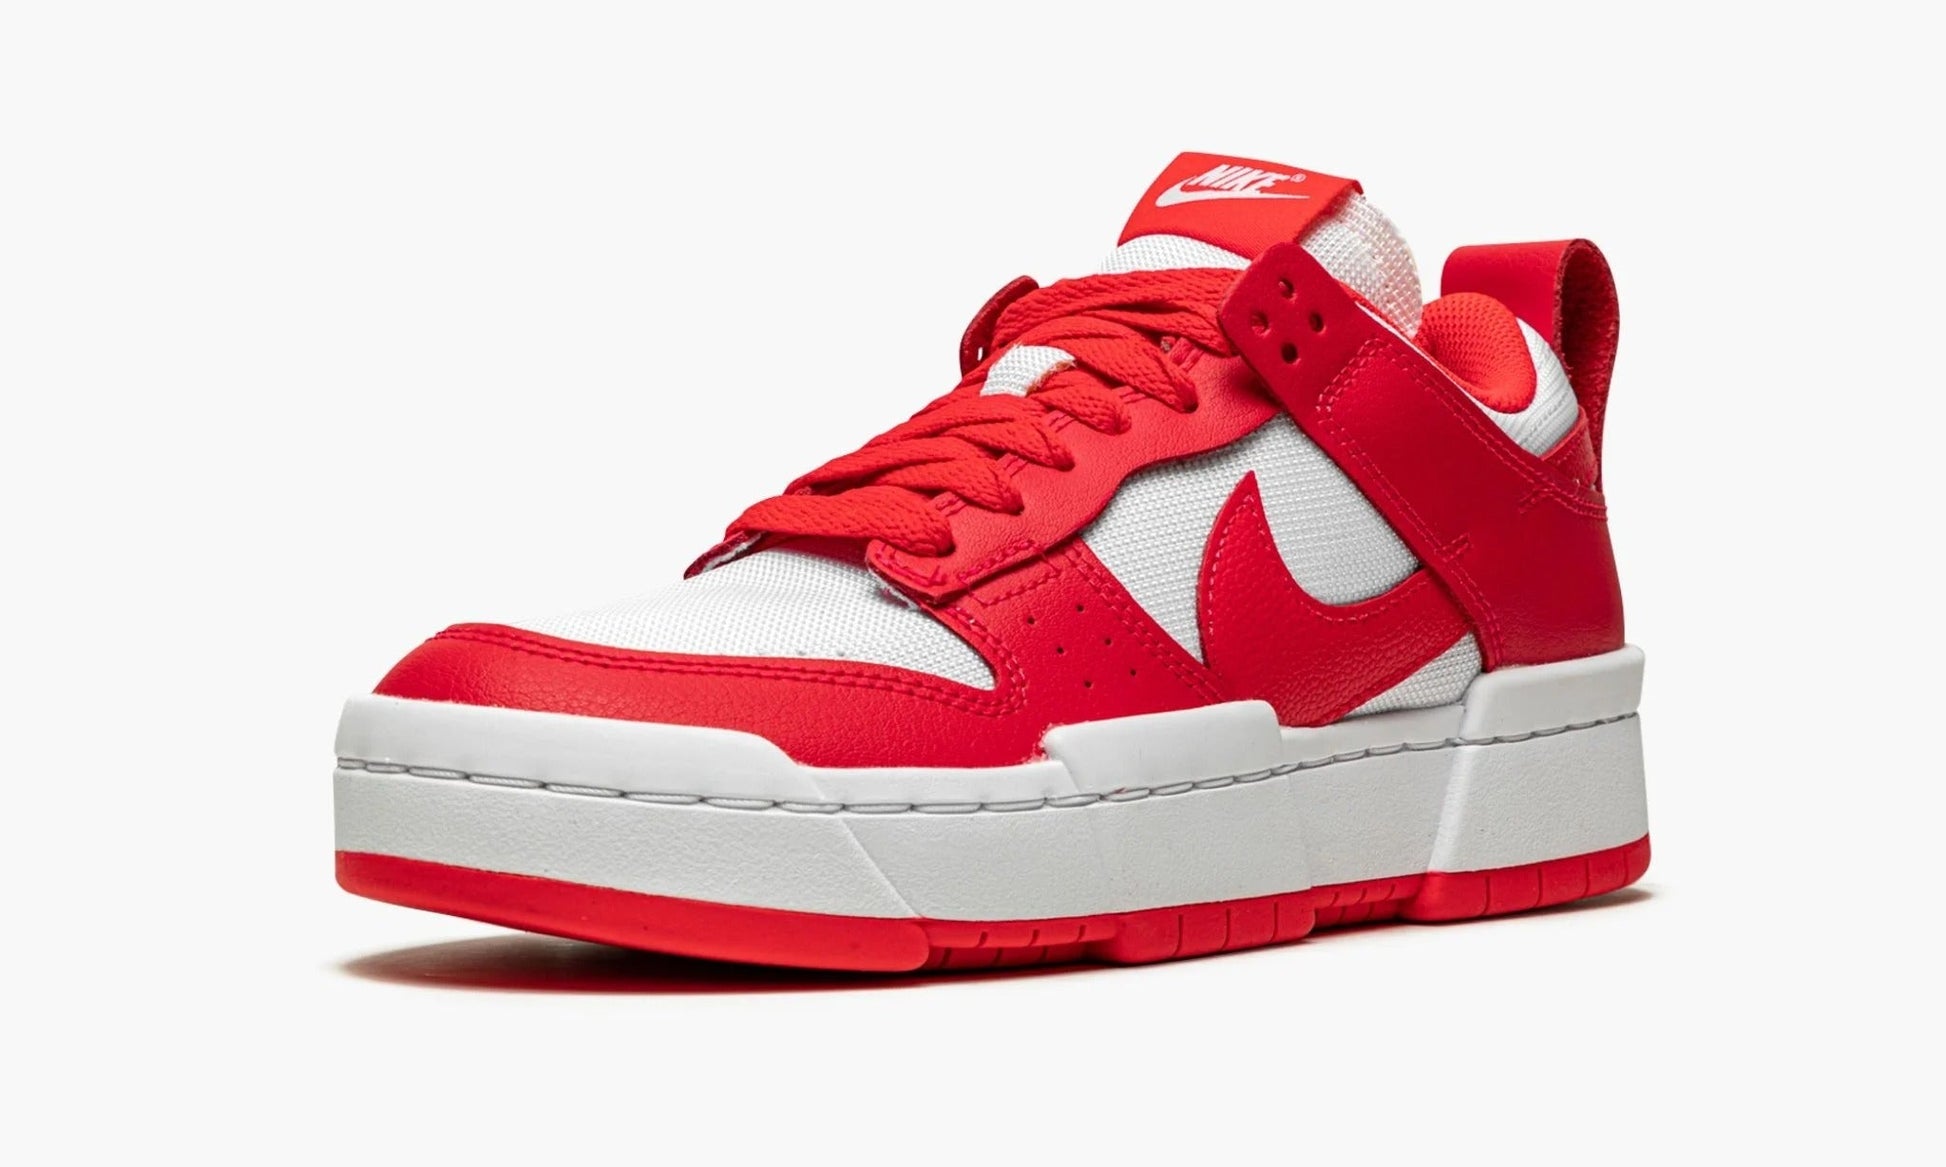 Dunk Low Disrupt Siren Red - CK6654 601 | The Sortage